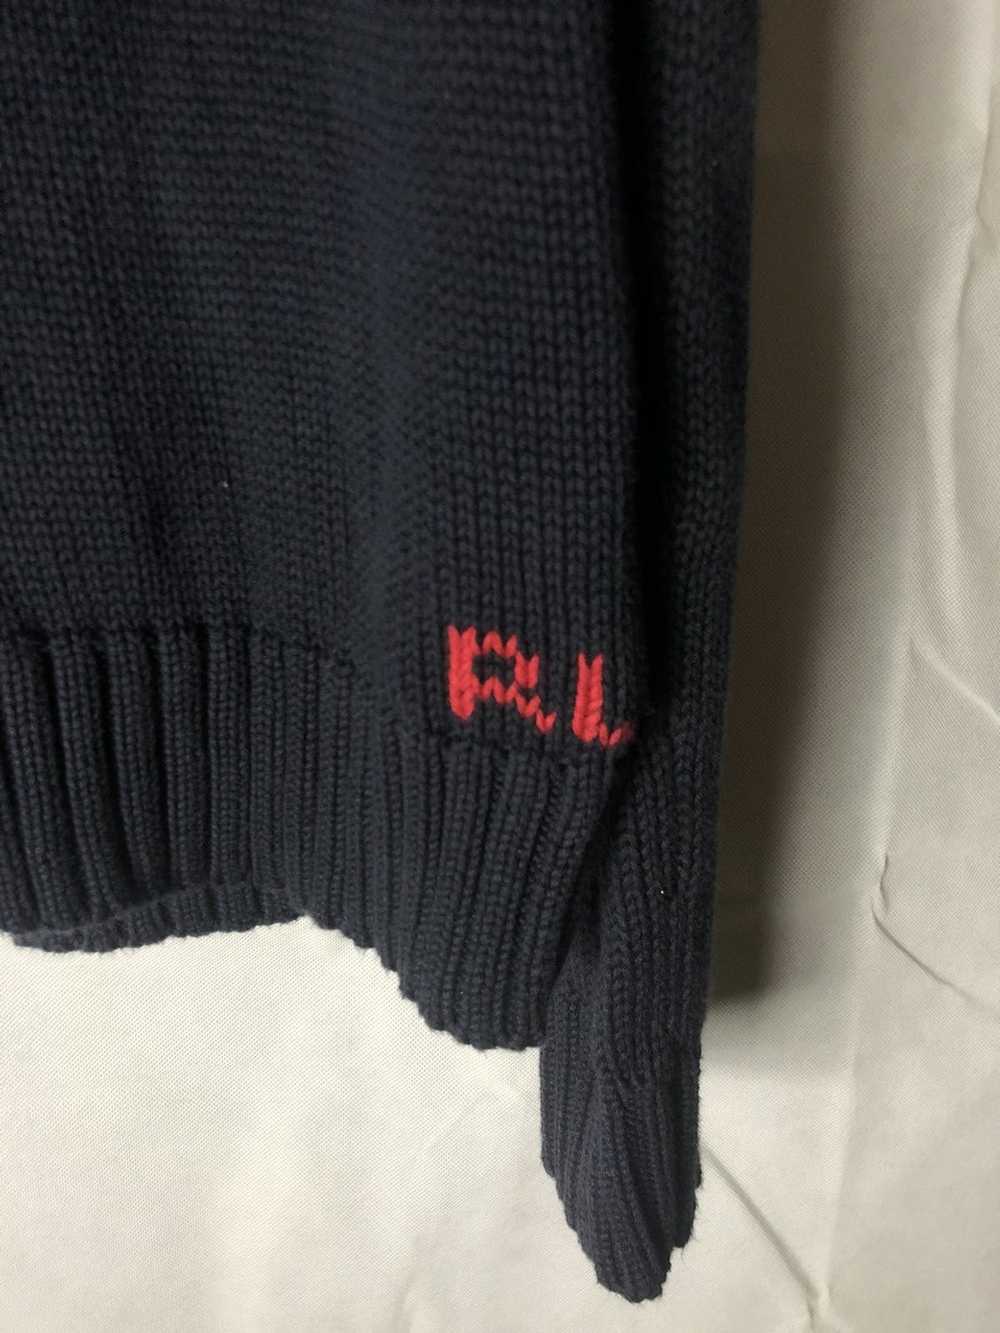 Polo Ralph Lauren American Flag Knit Sweater - image 3